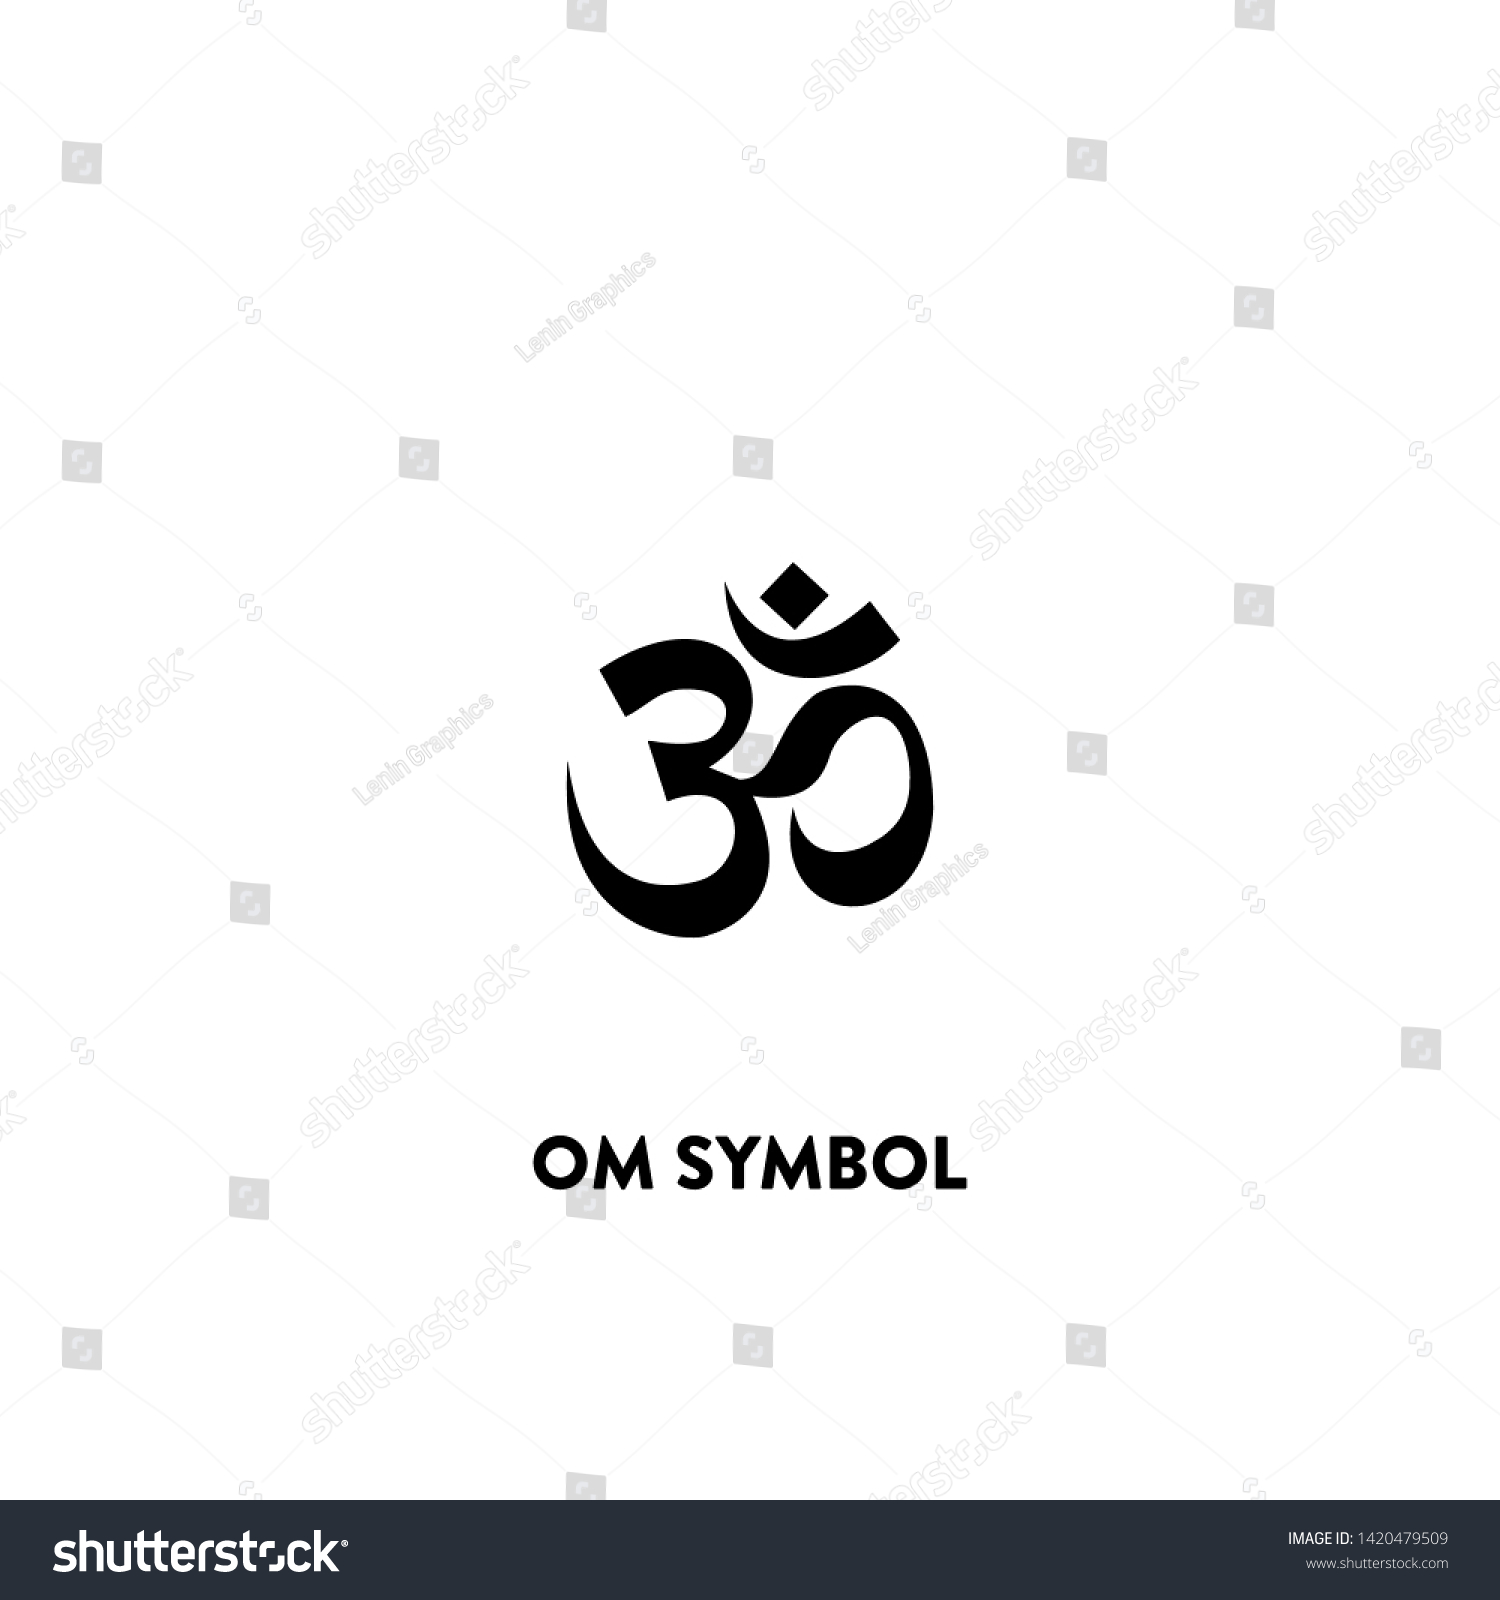 om symbol icon vector. om symbol sign on white background. om symbol icon for web and app #1420479509